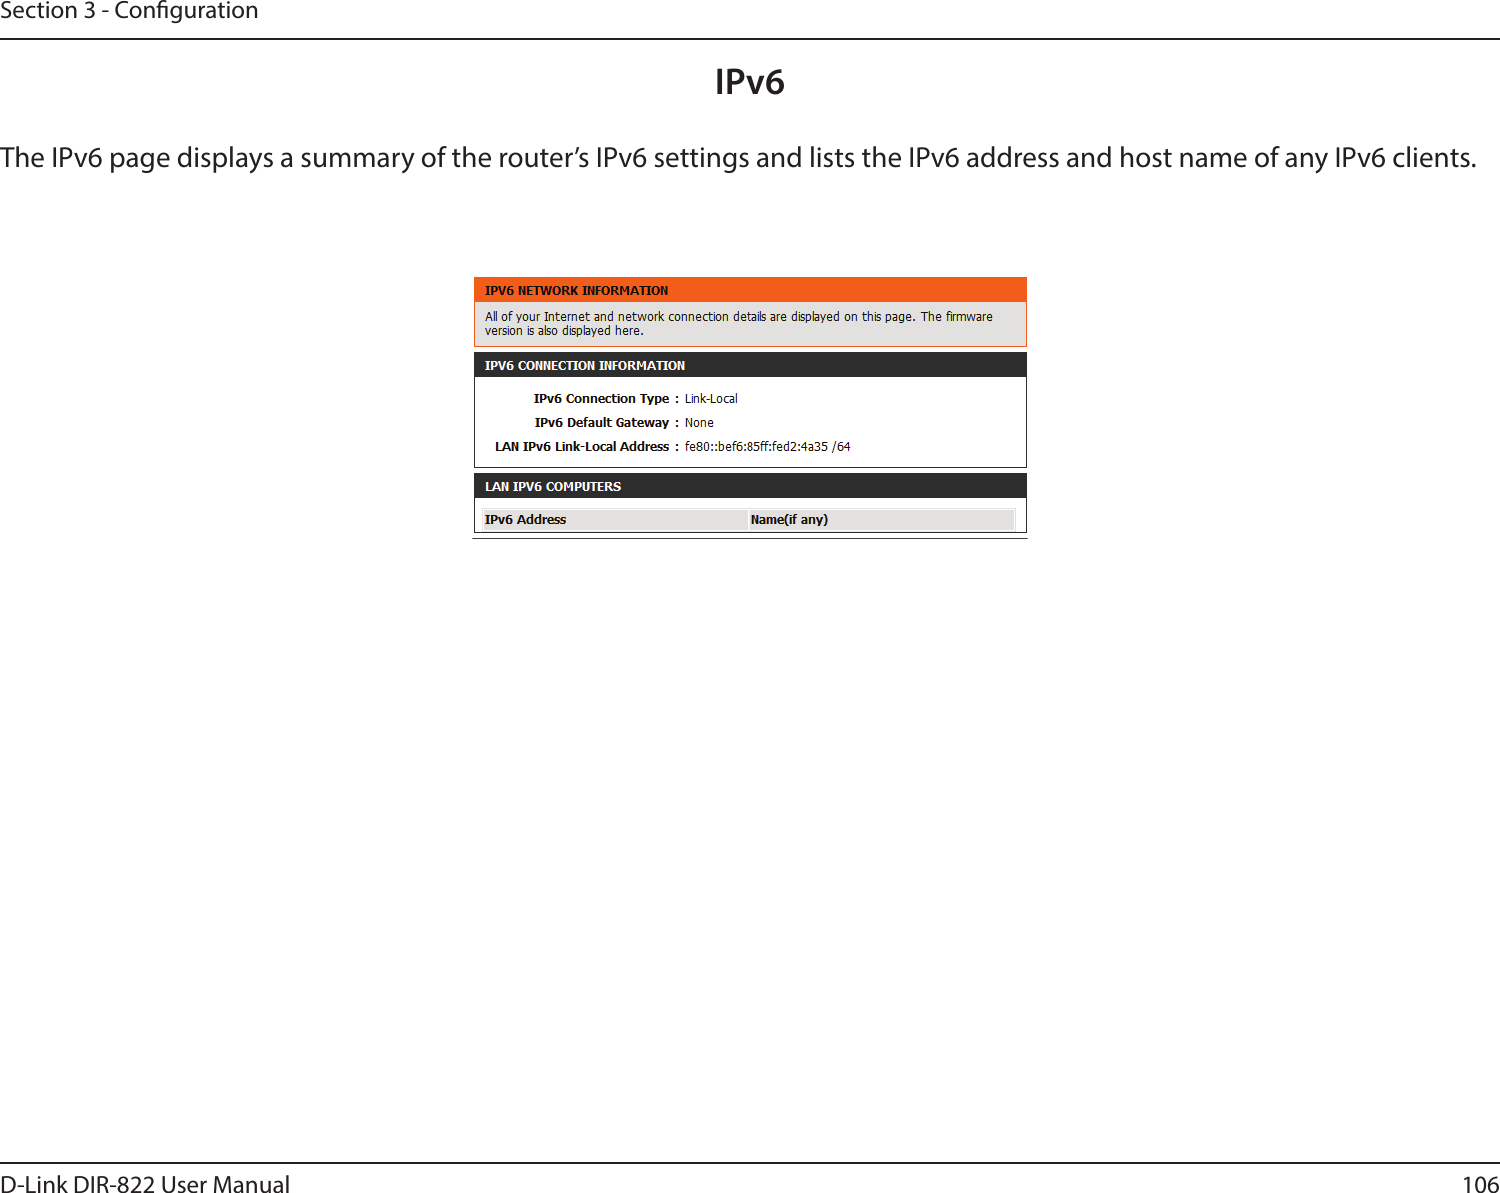 106D-Link DIR-822 User ManualSection 3 - CongurationIPv6The IPv6 page displays a summary of the router’s IPv6 settings and lists the IPv6 address and host name of any IPv6 clients. 